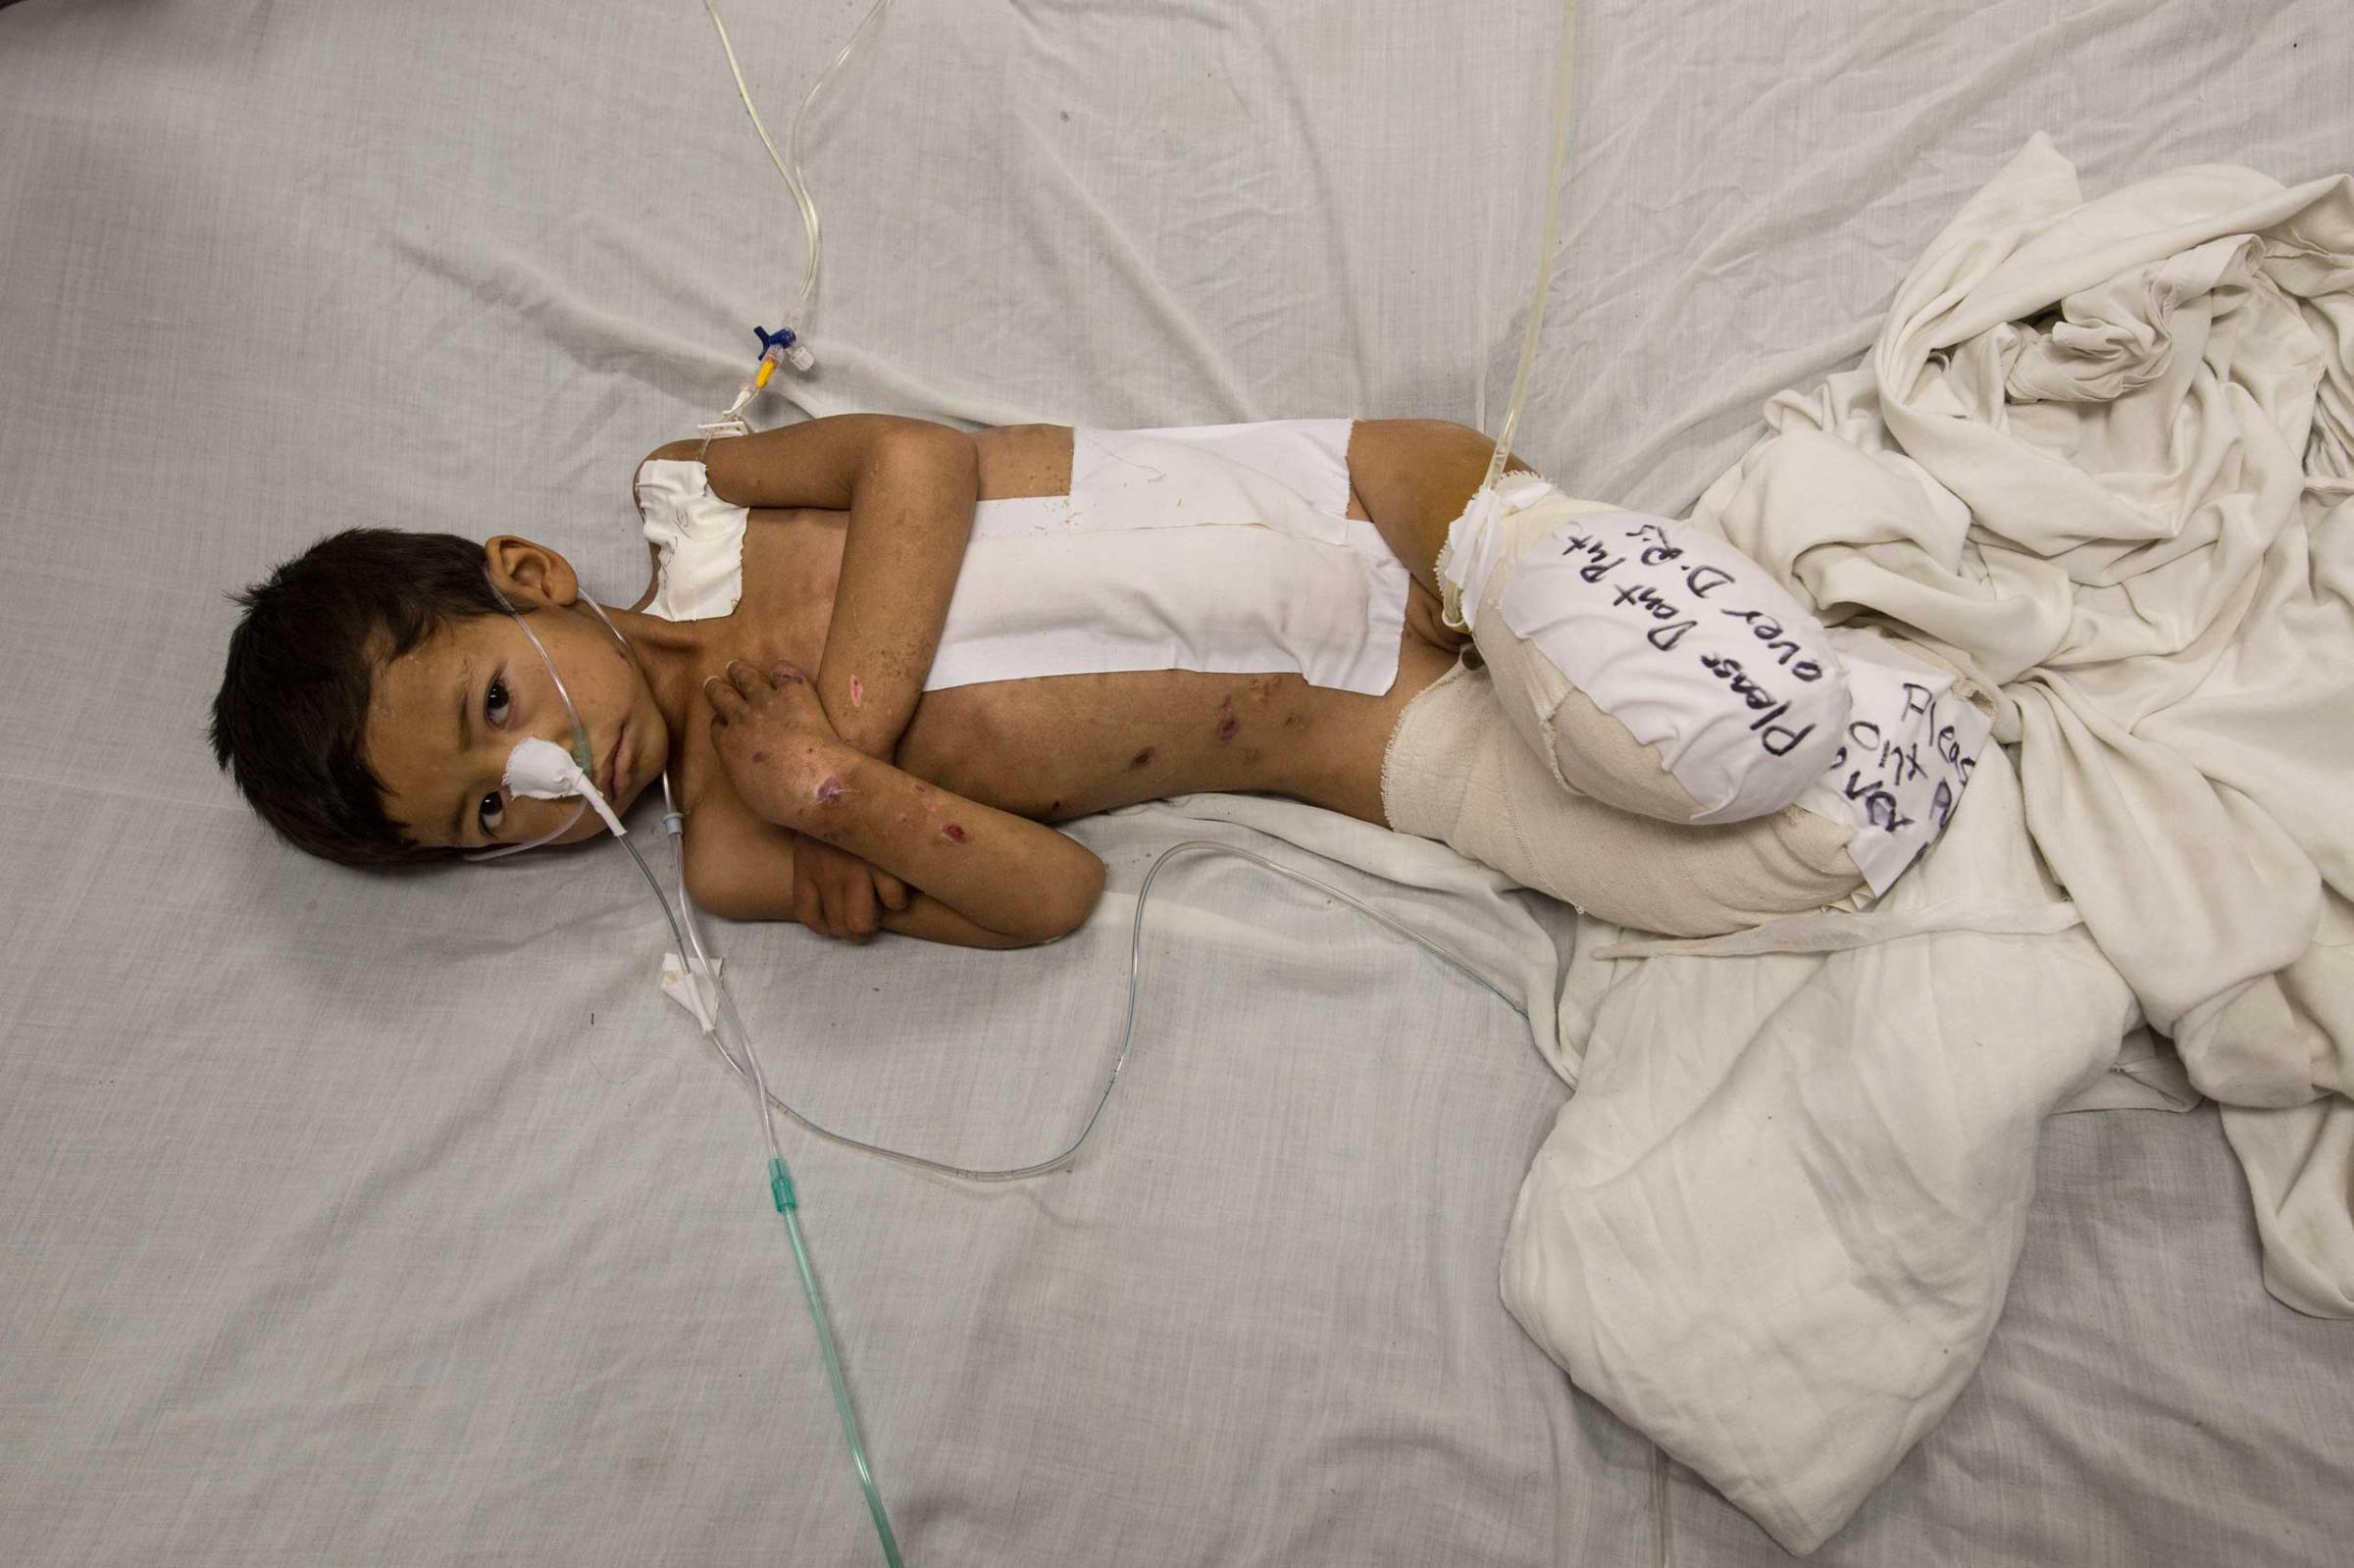 Kabir, 5, from Faryab lays in bed at the Emergency hospital in Kabul on April 3, 2016. He is a victim of a rocket attack, lost both of his legs along with his sister and brother who were also killed.